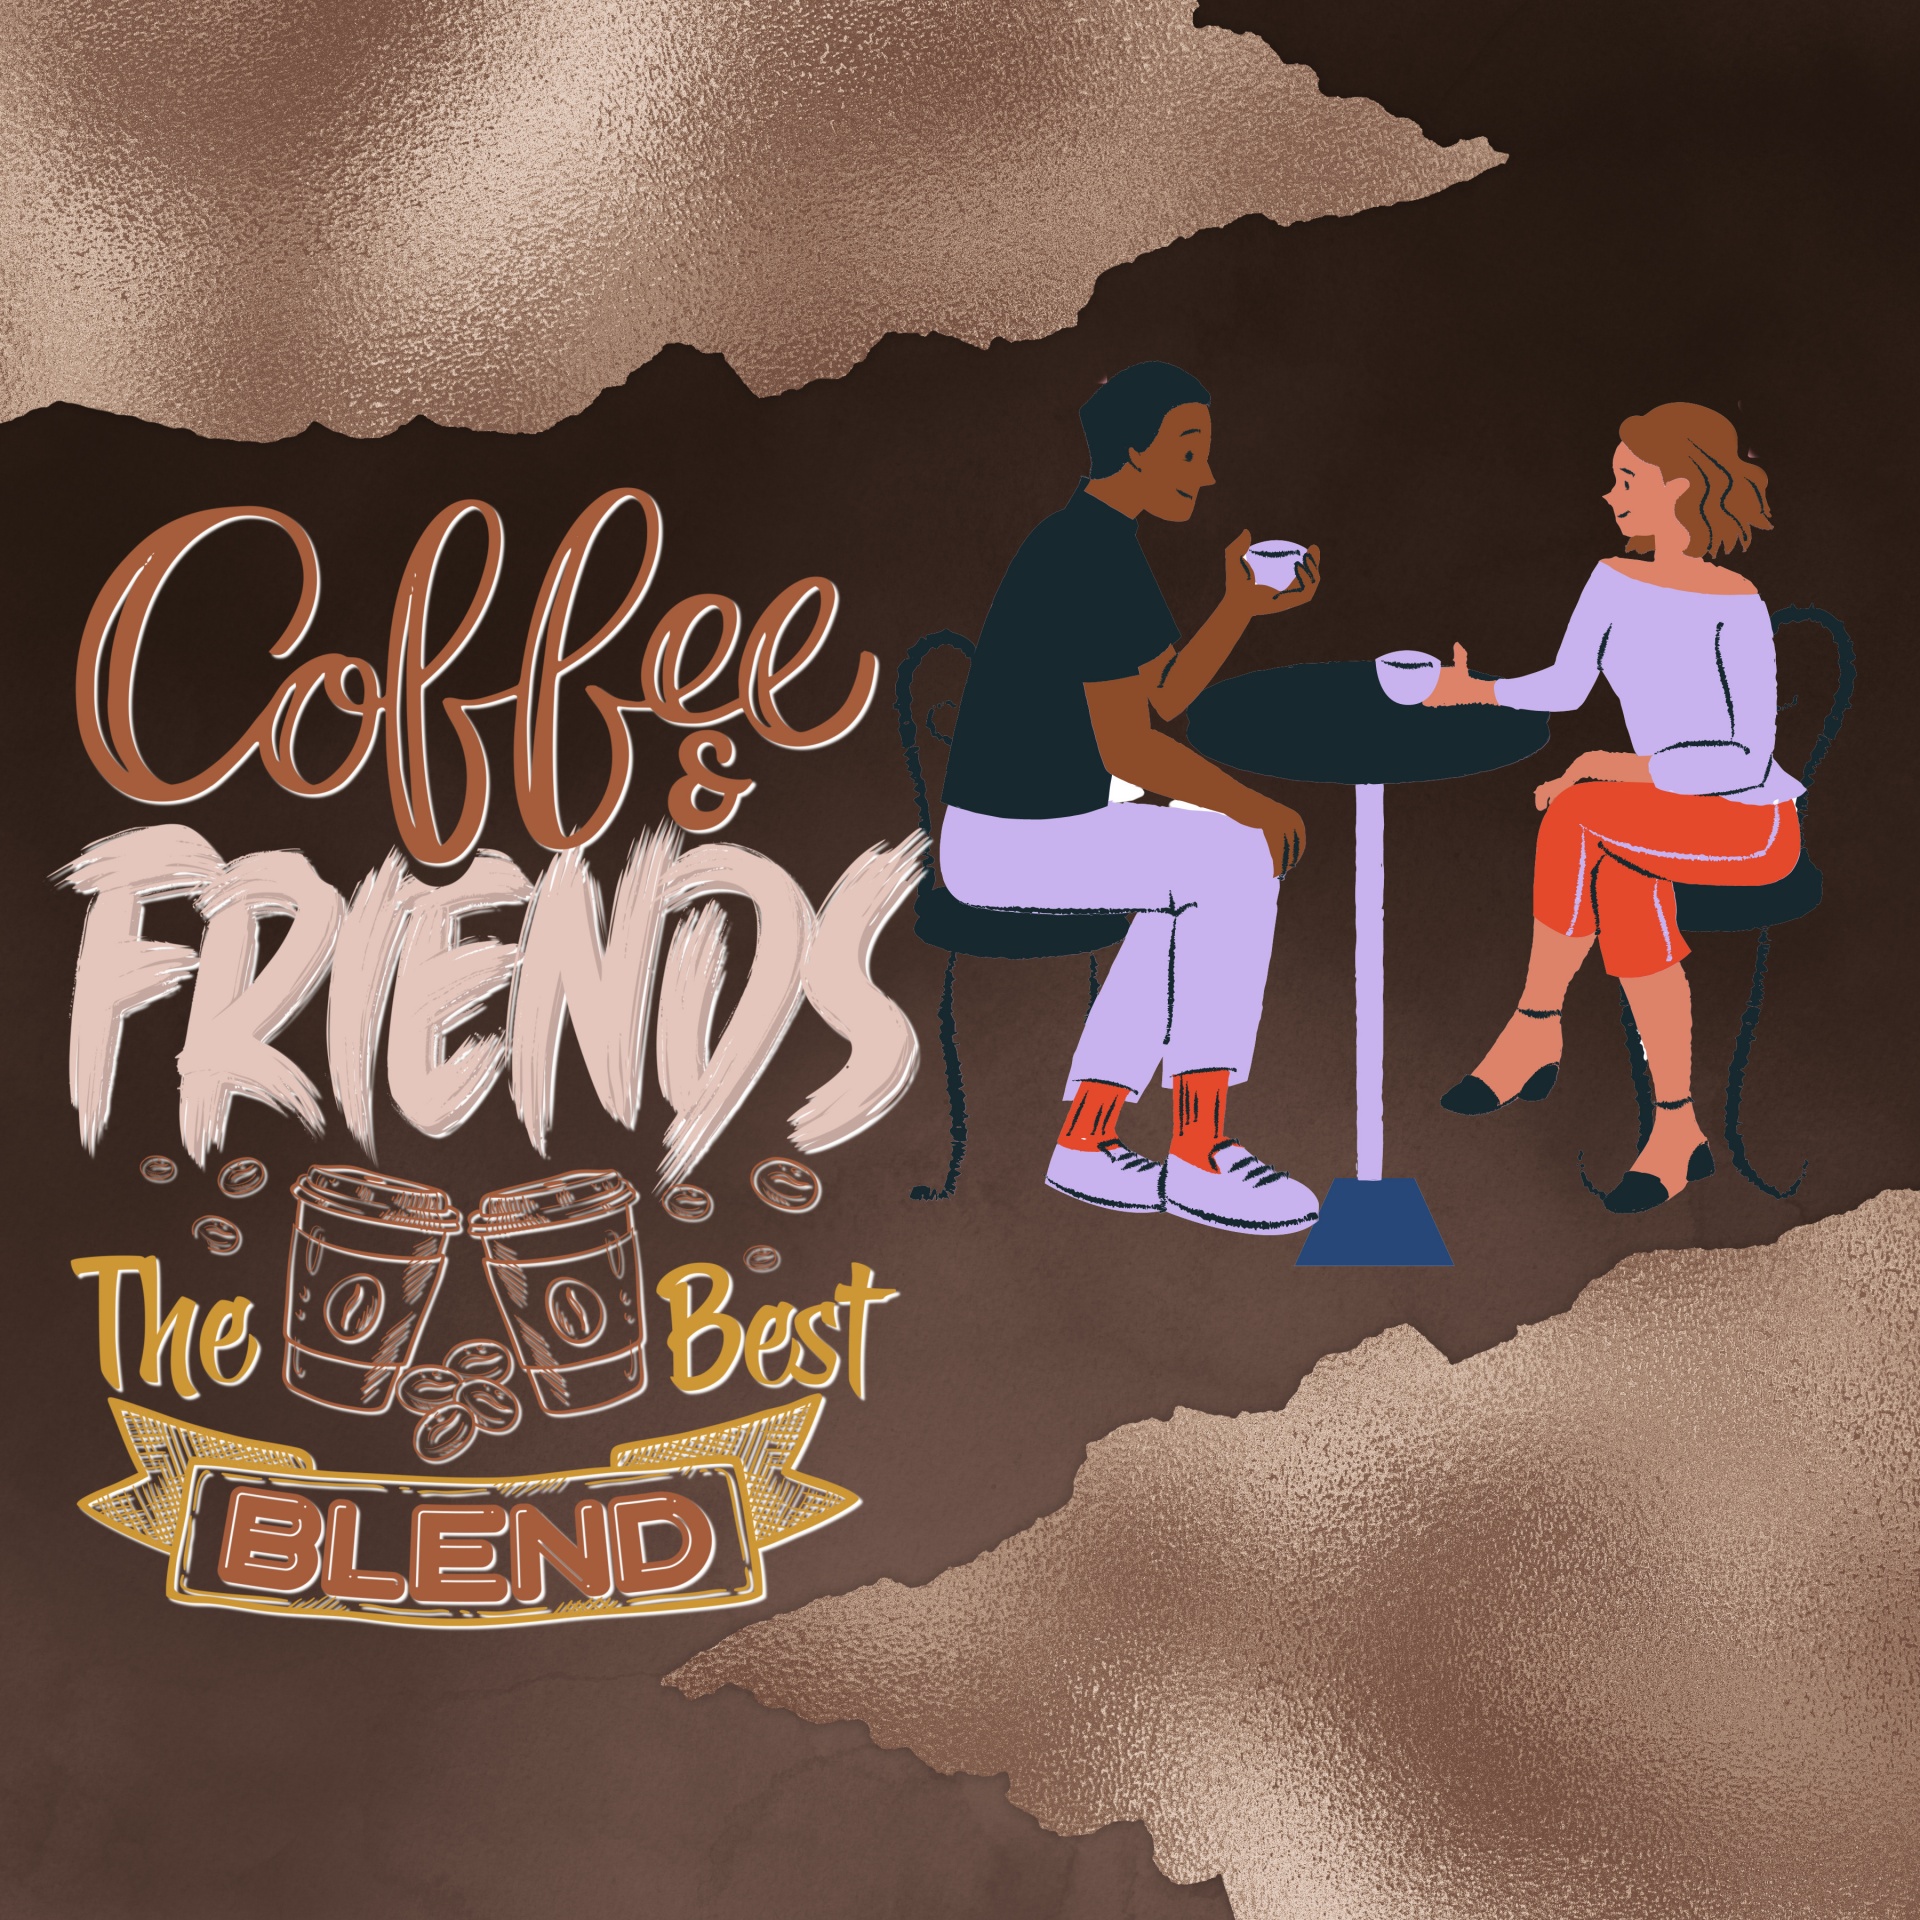 man and woman enjoying coffee with words about coffee and friends the best blend